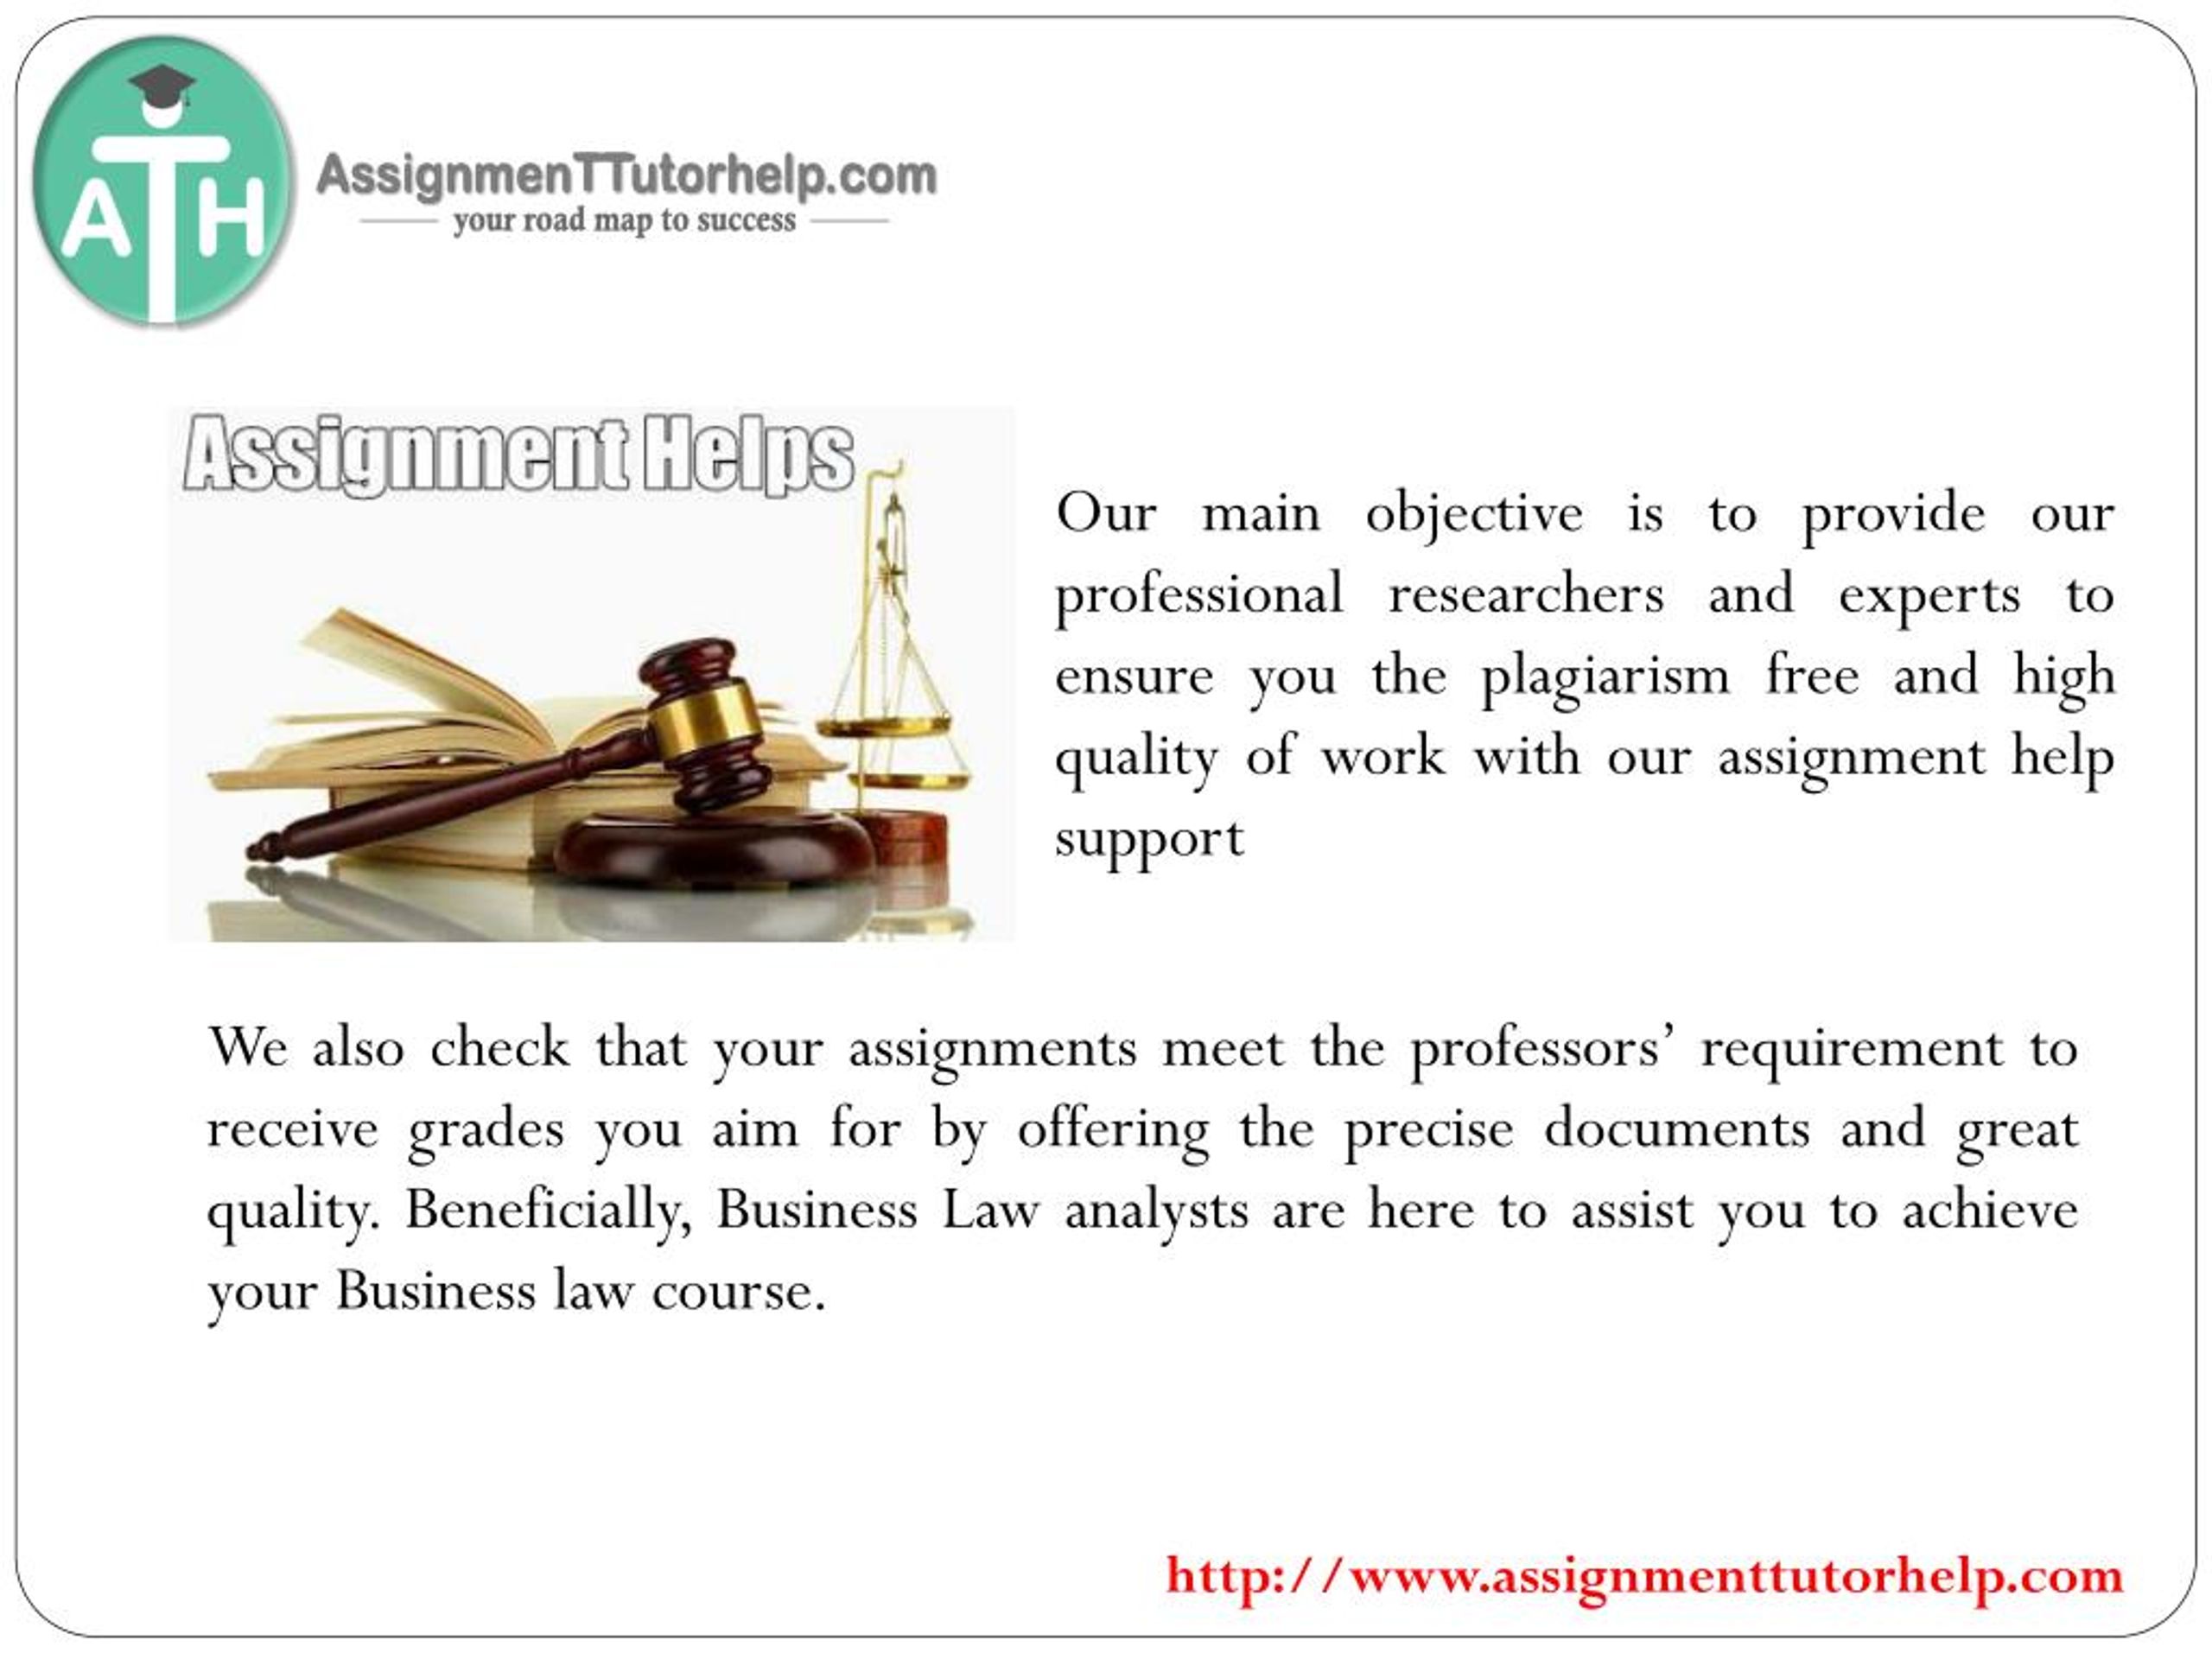 business law assignment help